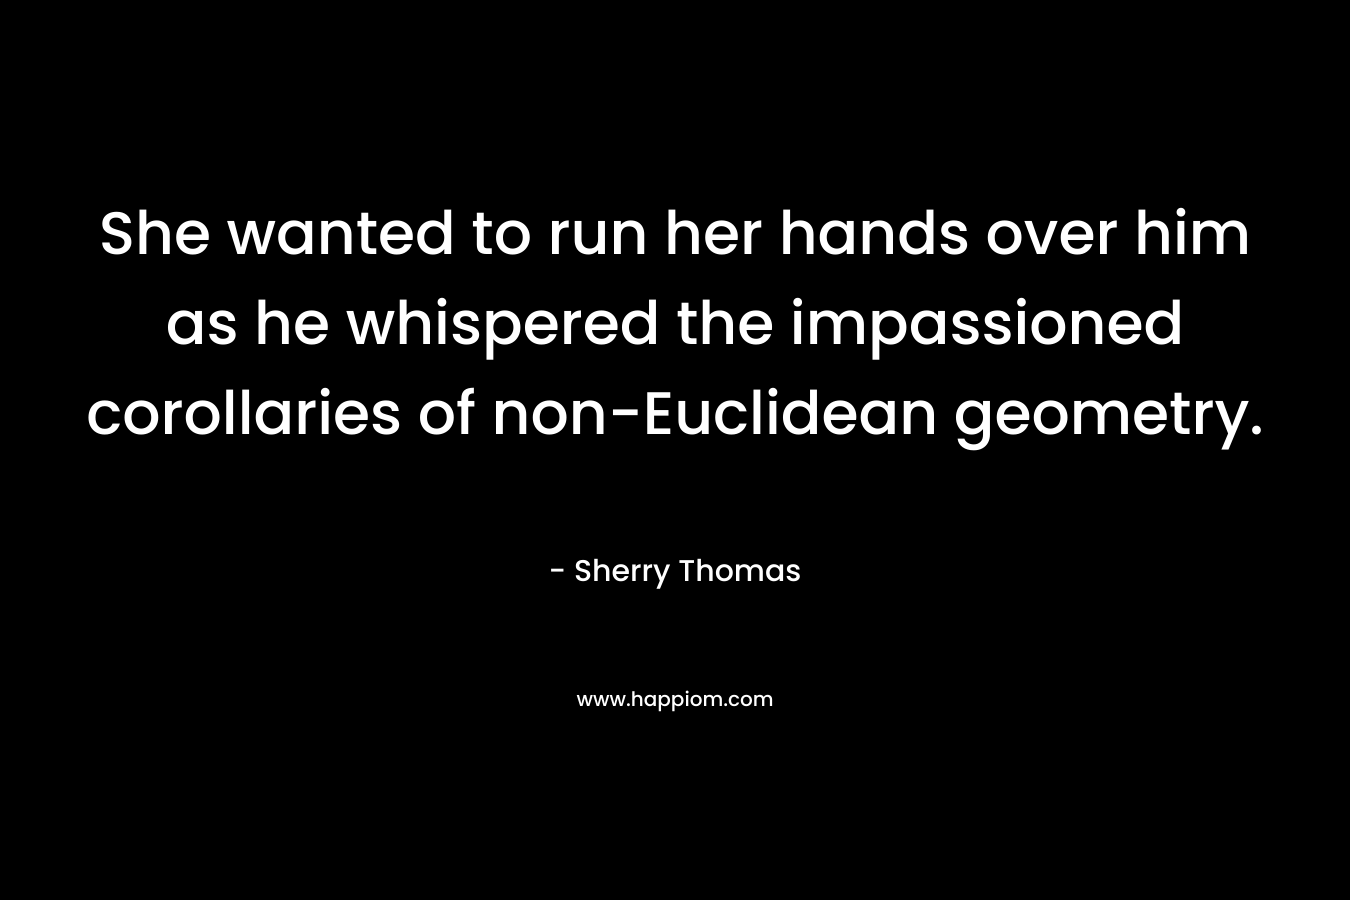 She wanted to run her hands over him as he whispered the impassioned corollaries of non-Euclidean geometry.